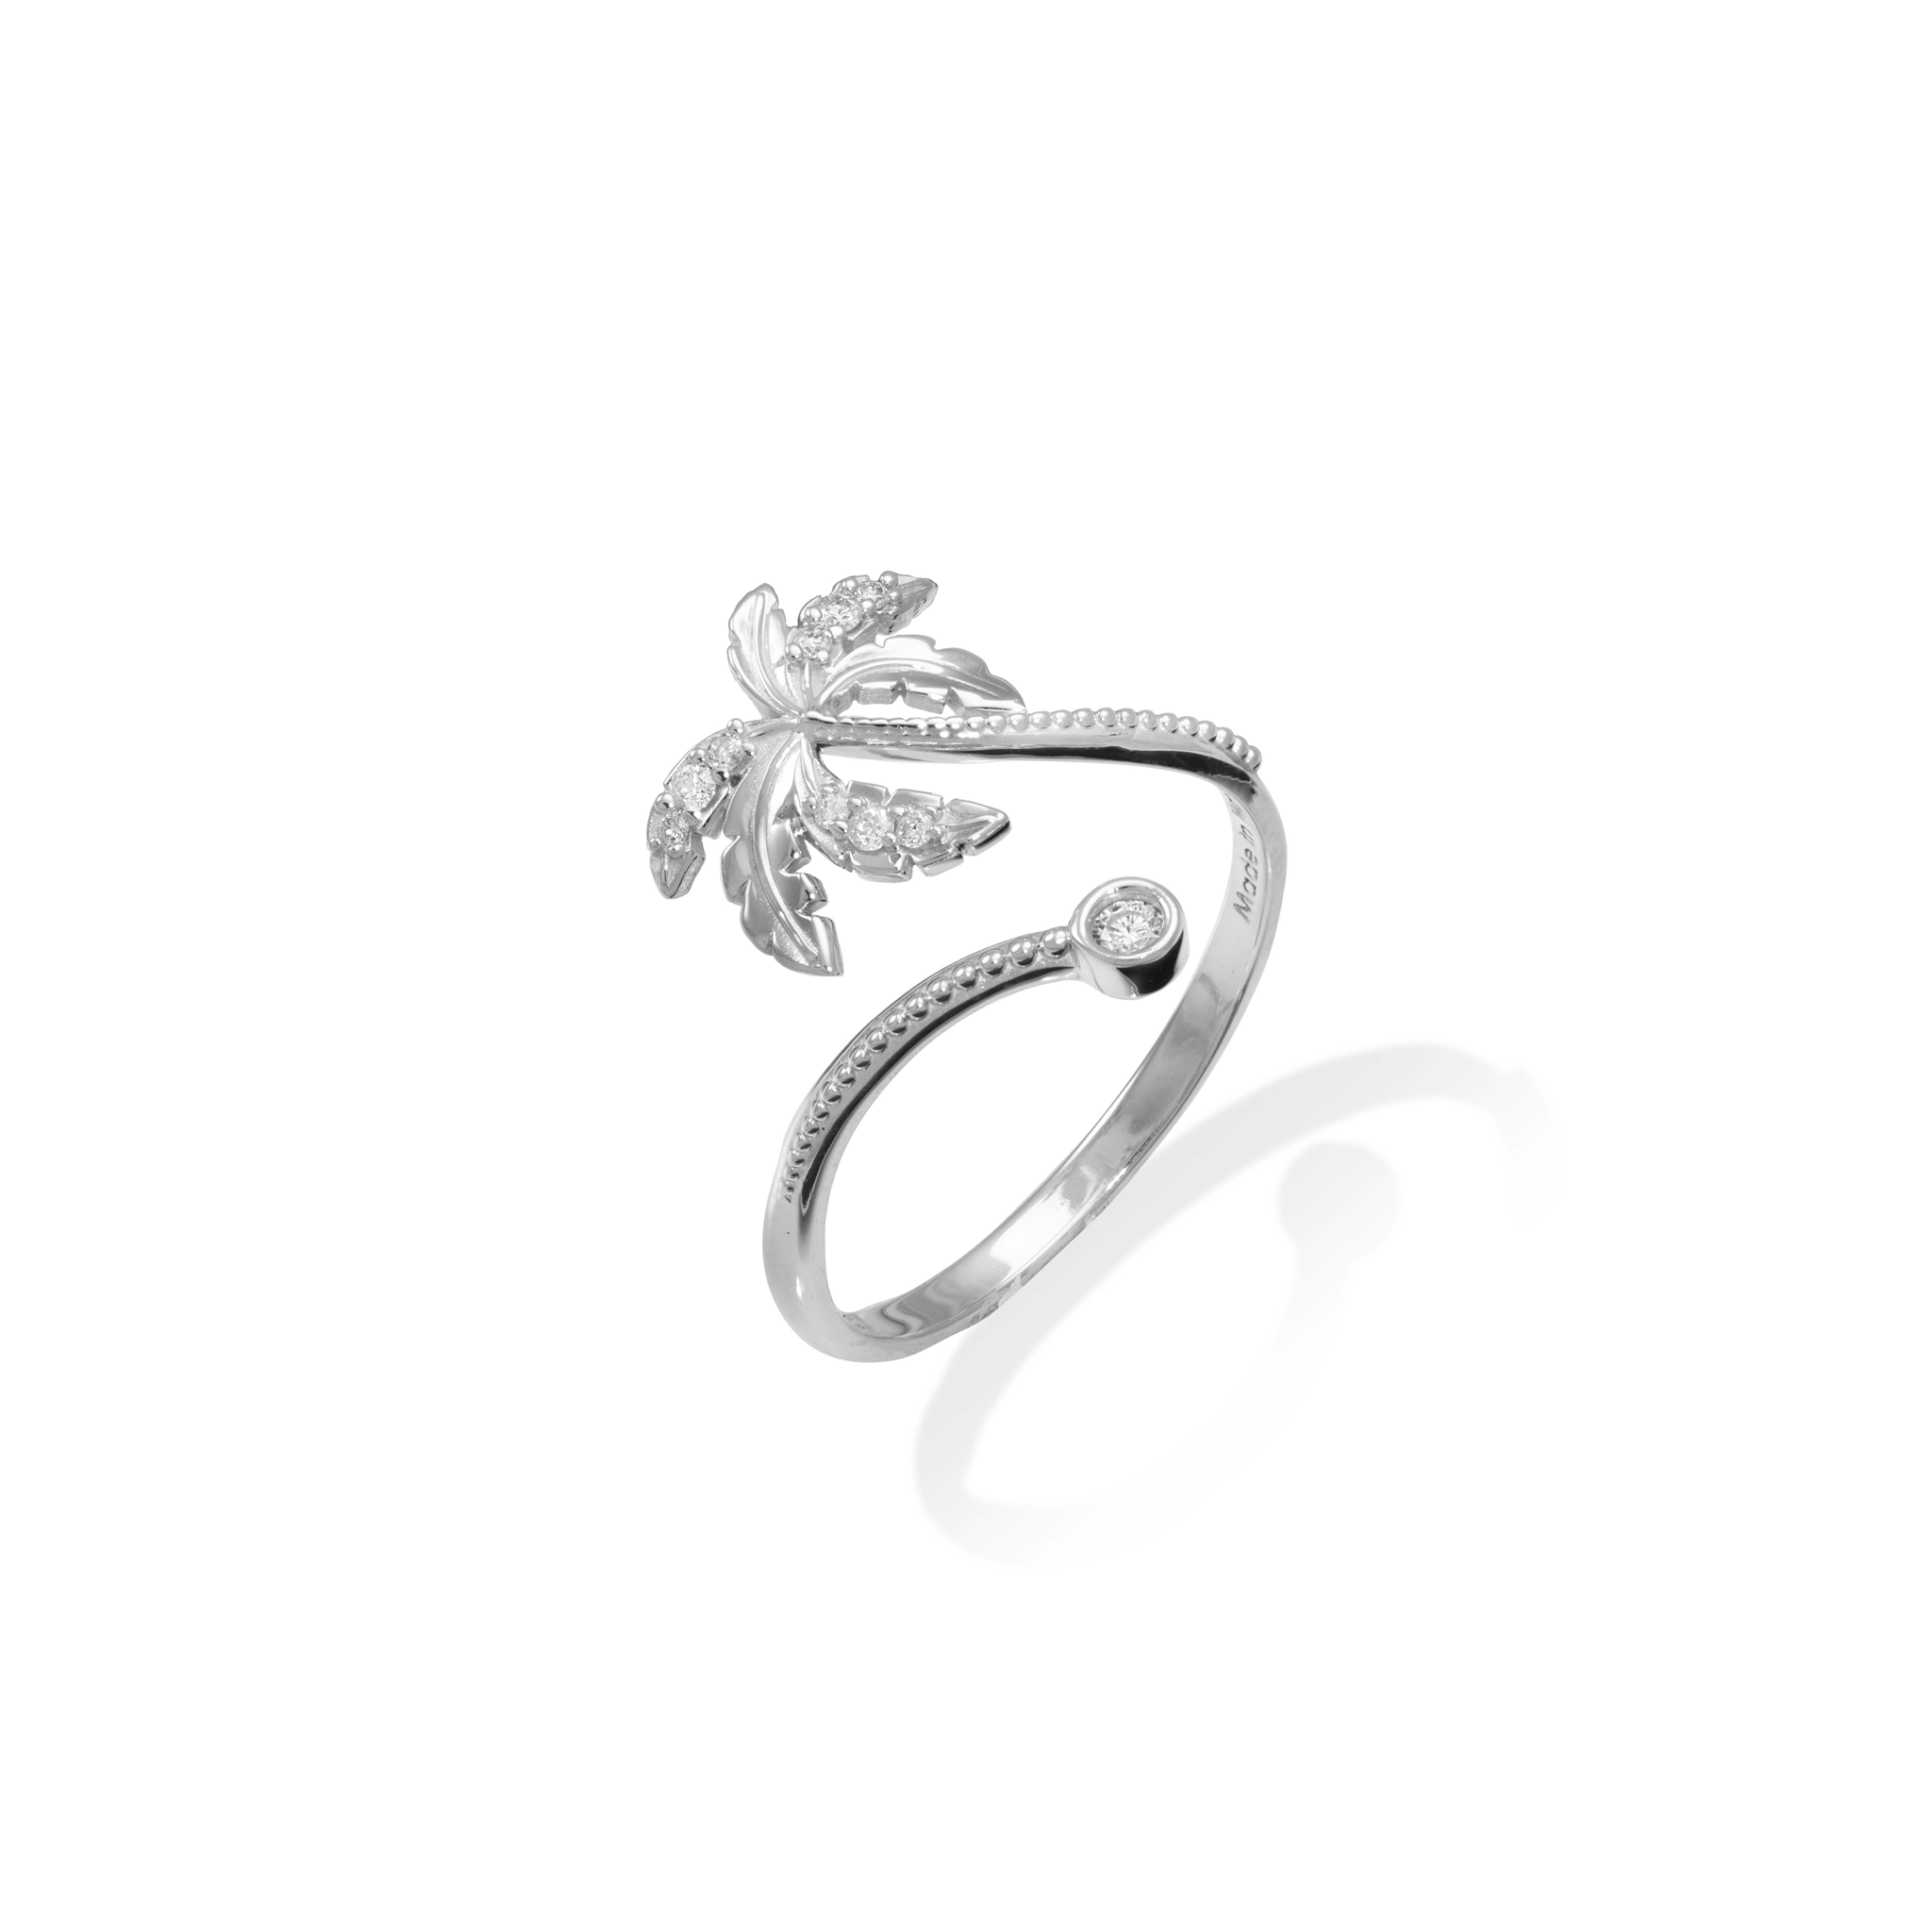 Paradise Palms - Palm Tree Ring in White Gold with Diamonds - 18mm